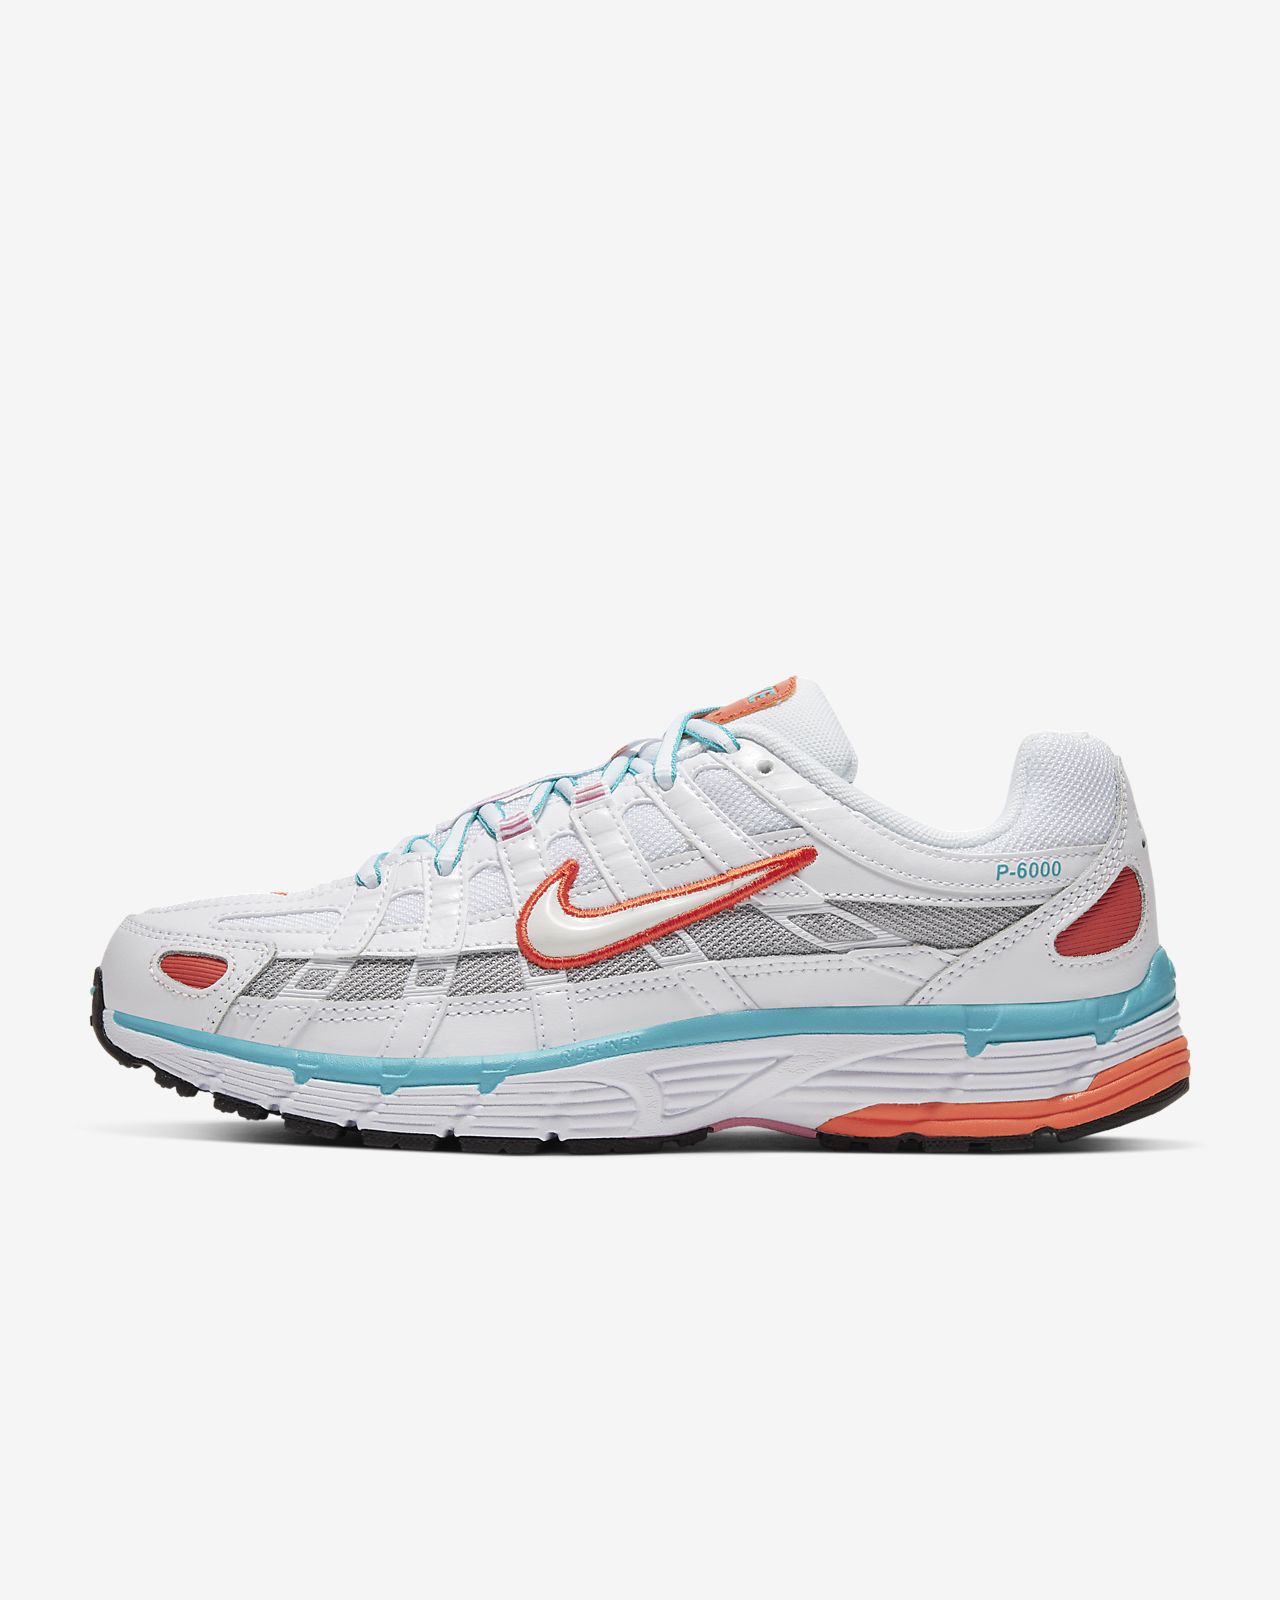 nike shoes 3000 rupees